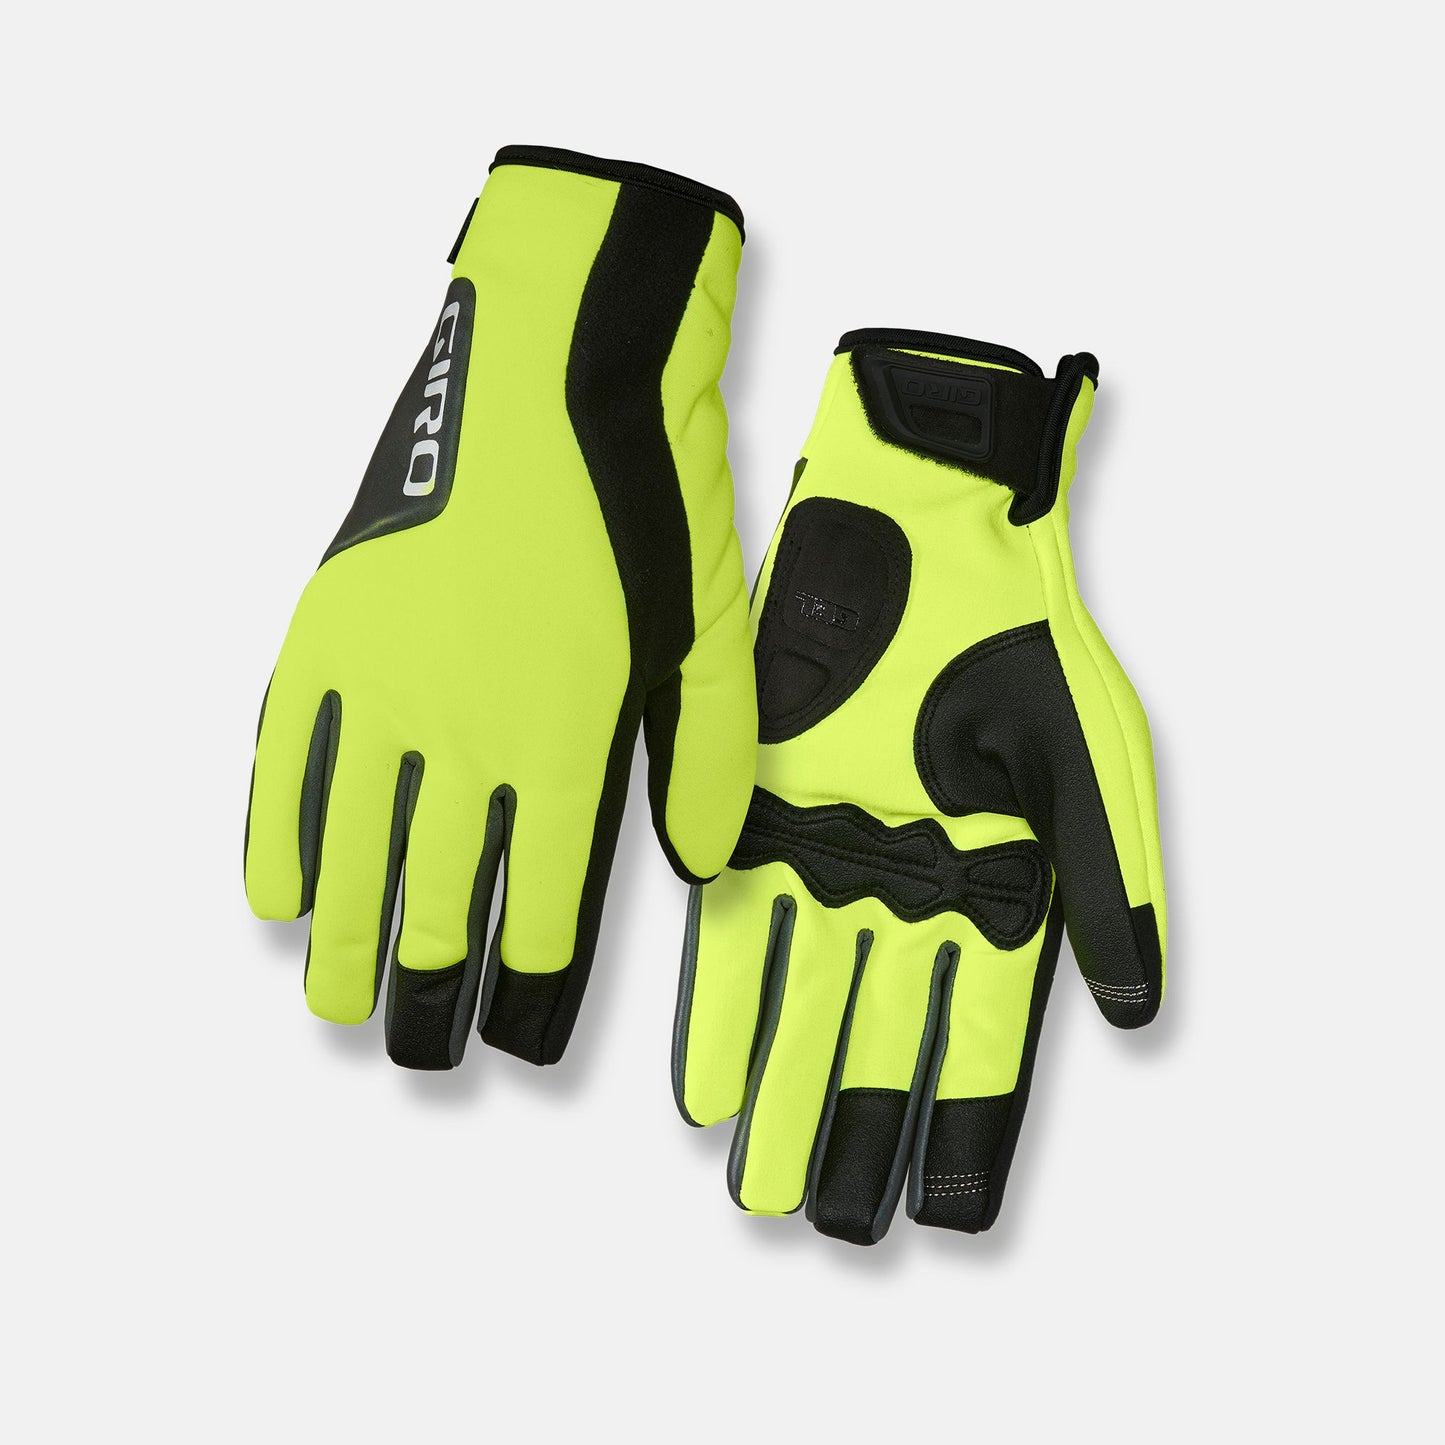 Giro Ambient 2.0 Winter Gloves - Highlight Yellow/Black - Size M